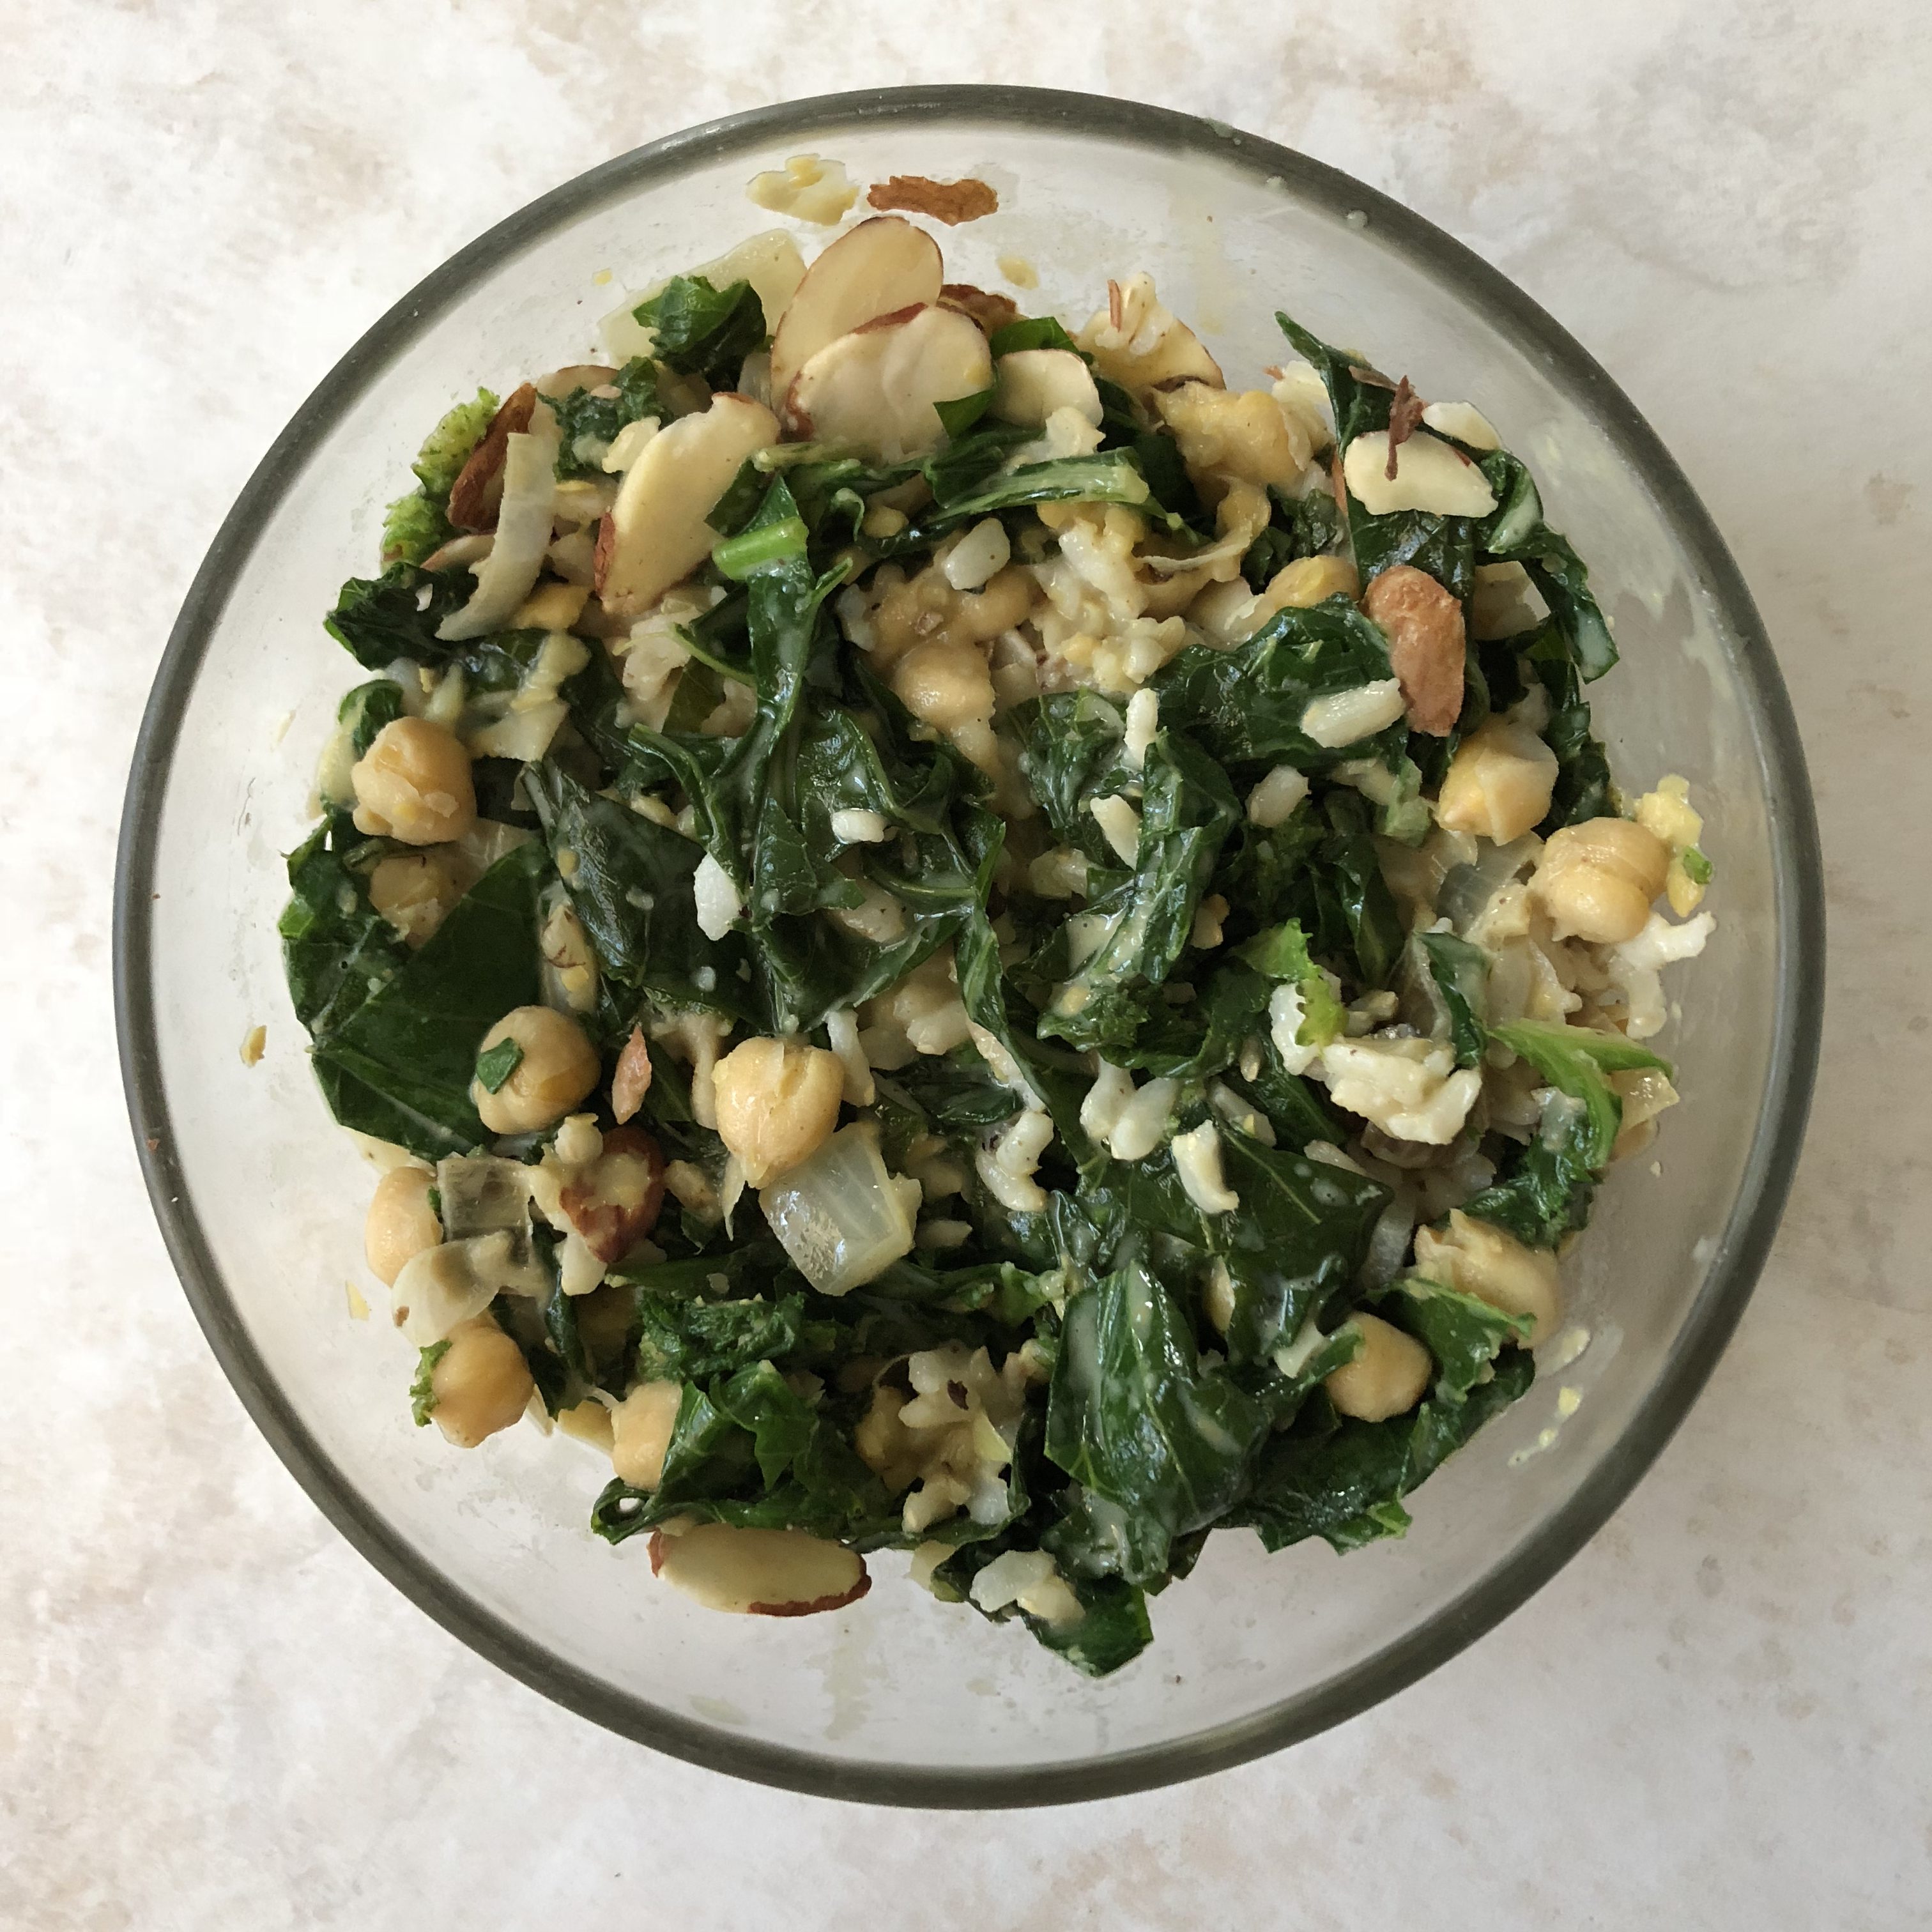 Coconut Curried Greens with Chickpeas